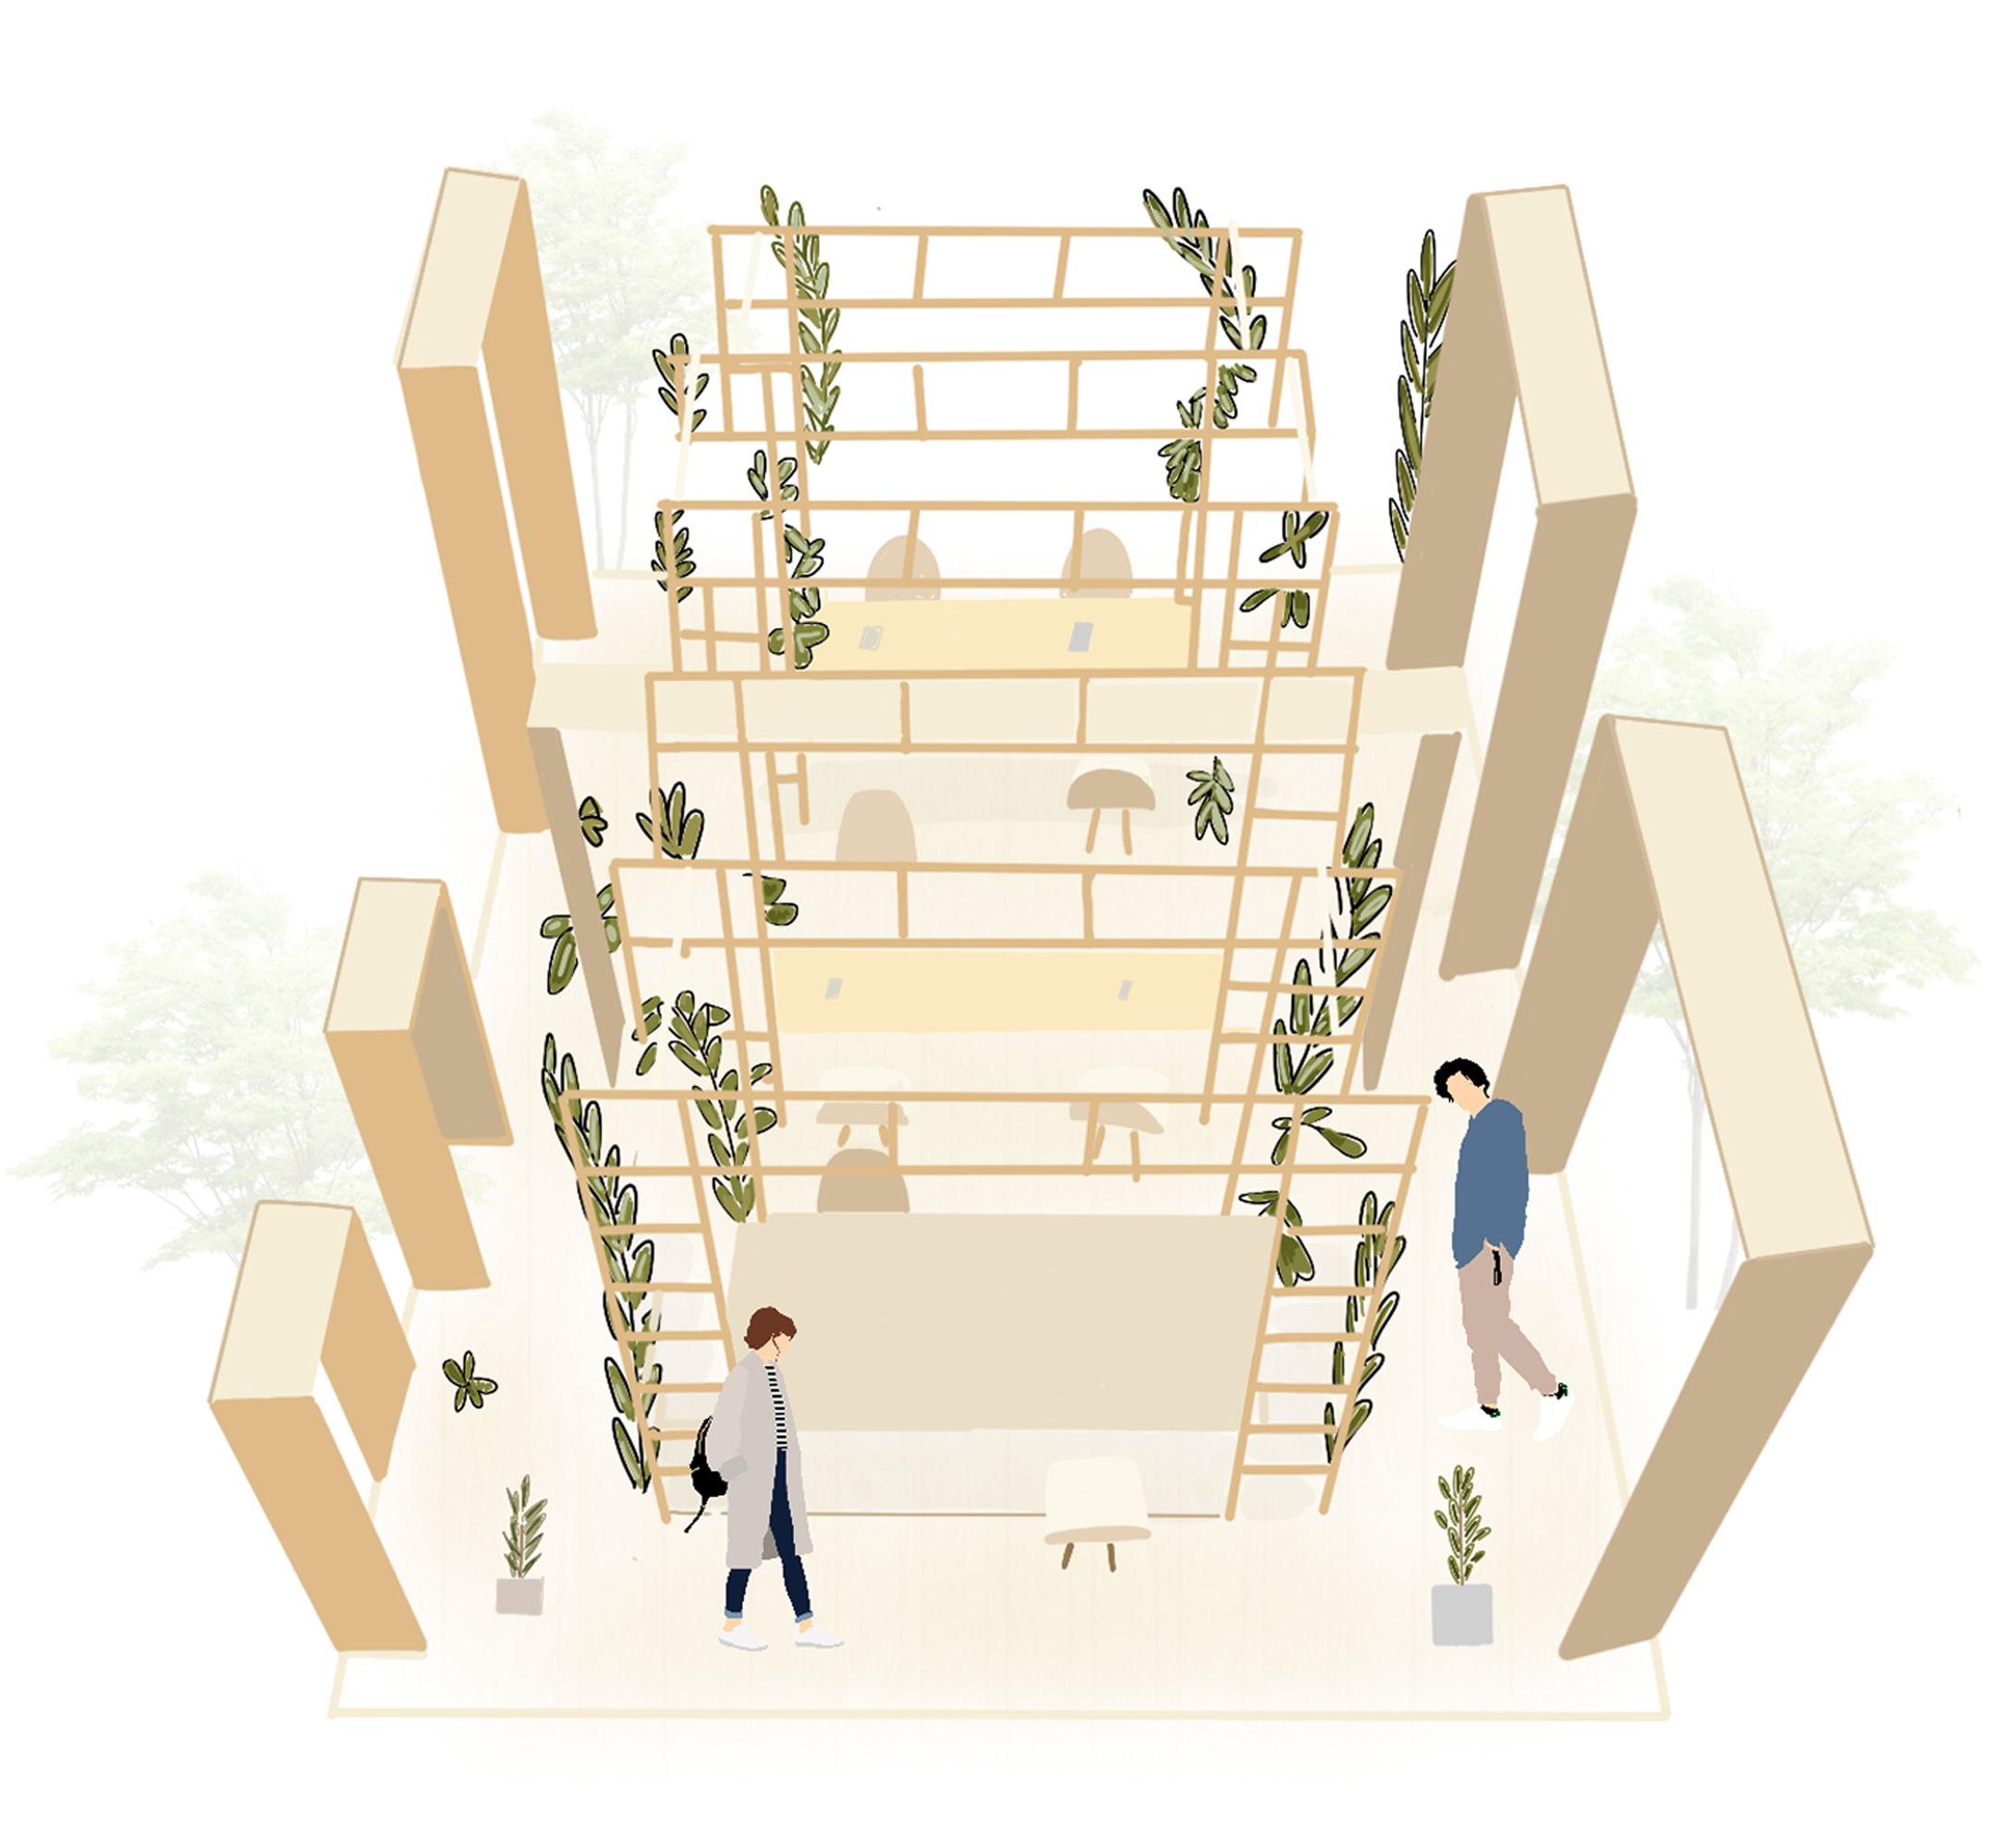 Interior Design work by Maisy Eastaugh showing a pre visualisation of a workshop space. This shows a wooden structure with desks which allows collaboration between users.